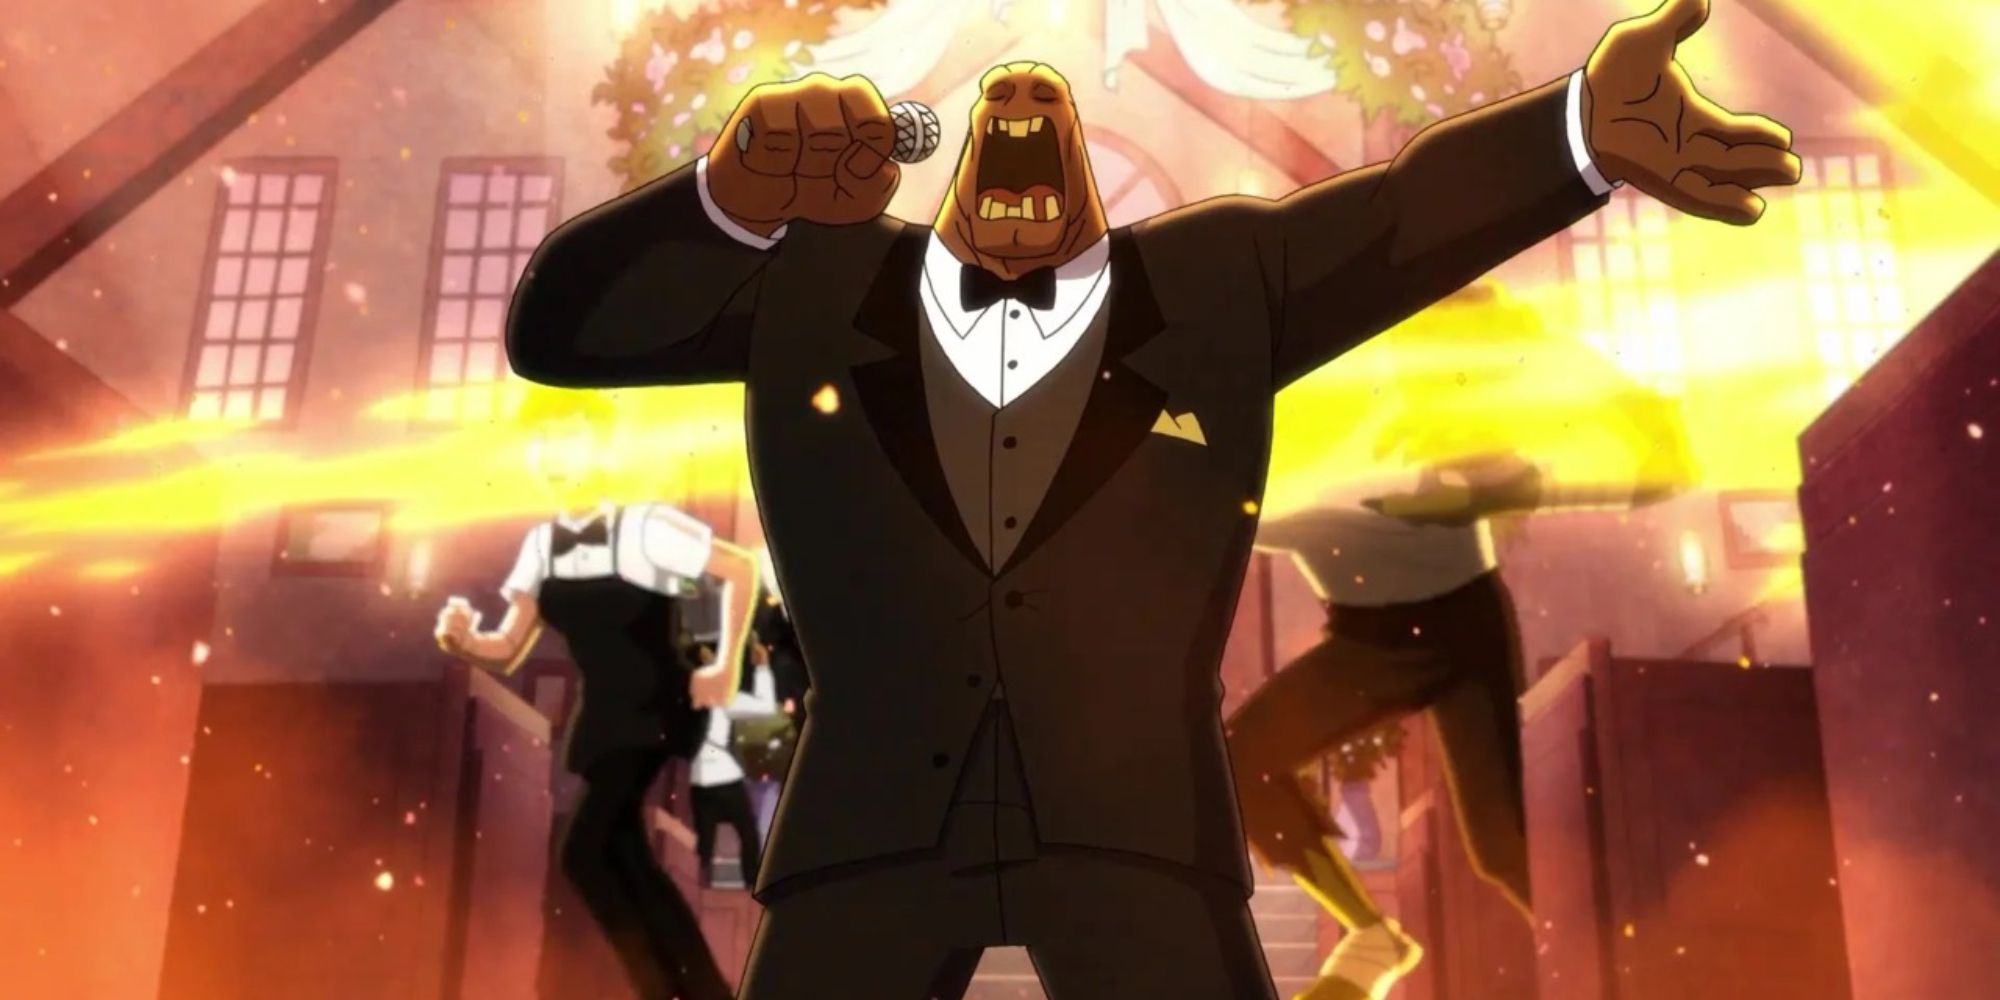 Clayface wearing a tux and singing in Harley Quinn.